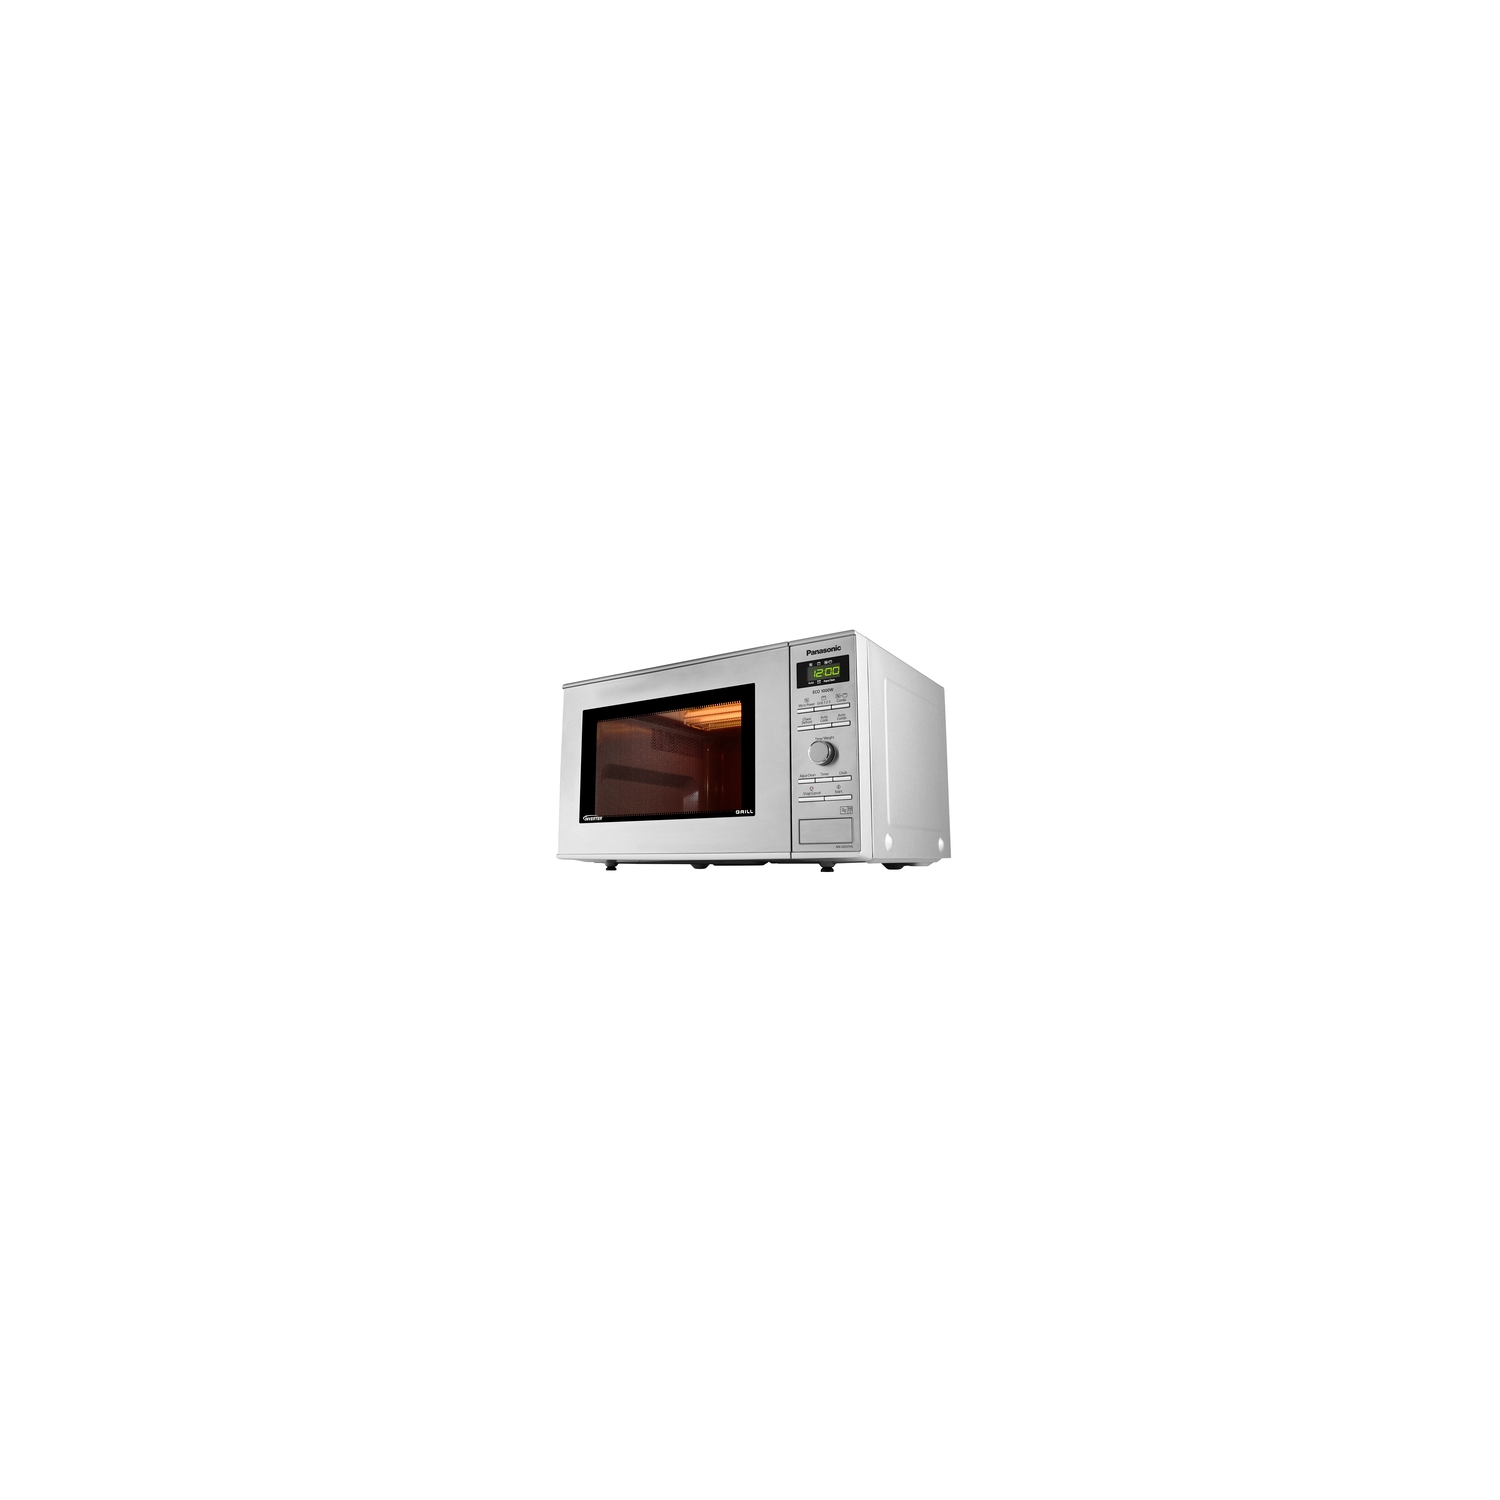 Panasonic NNGD37HSBPQ Microwave oven with grill - 3